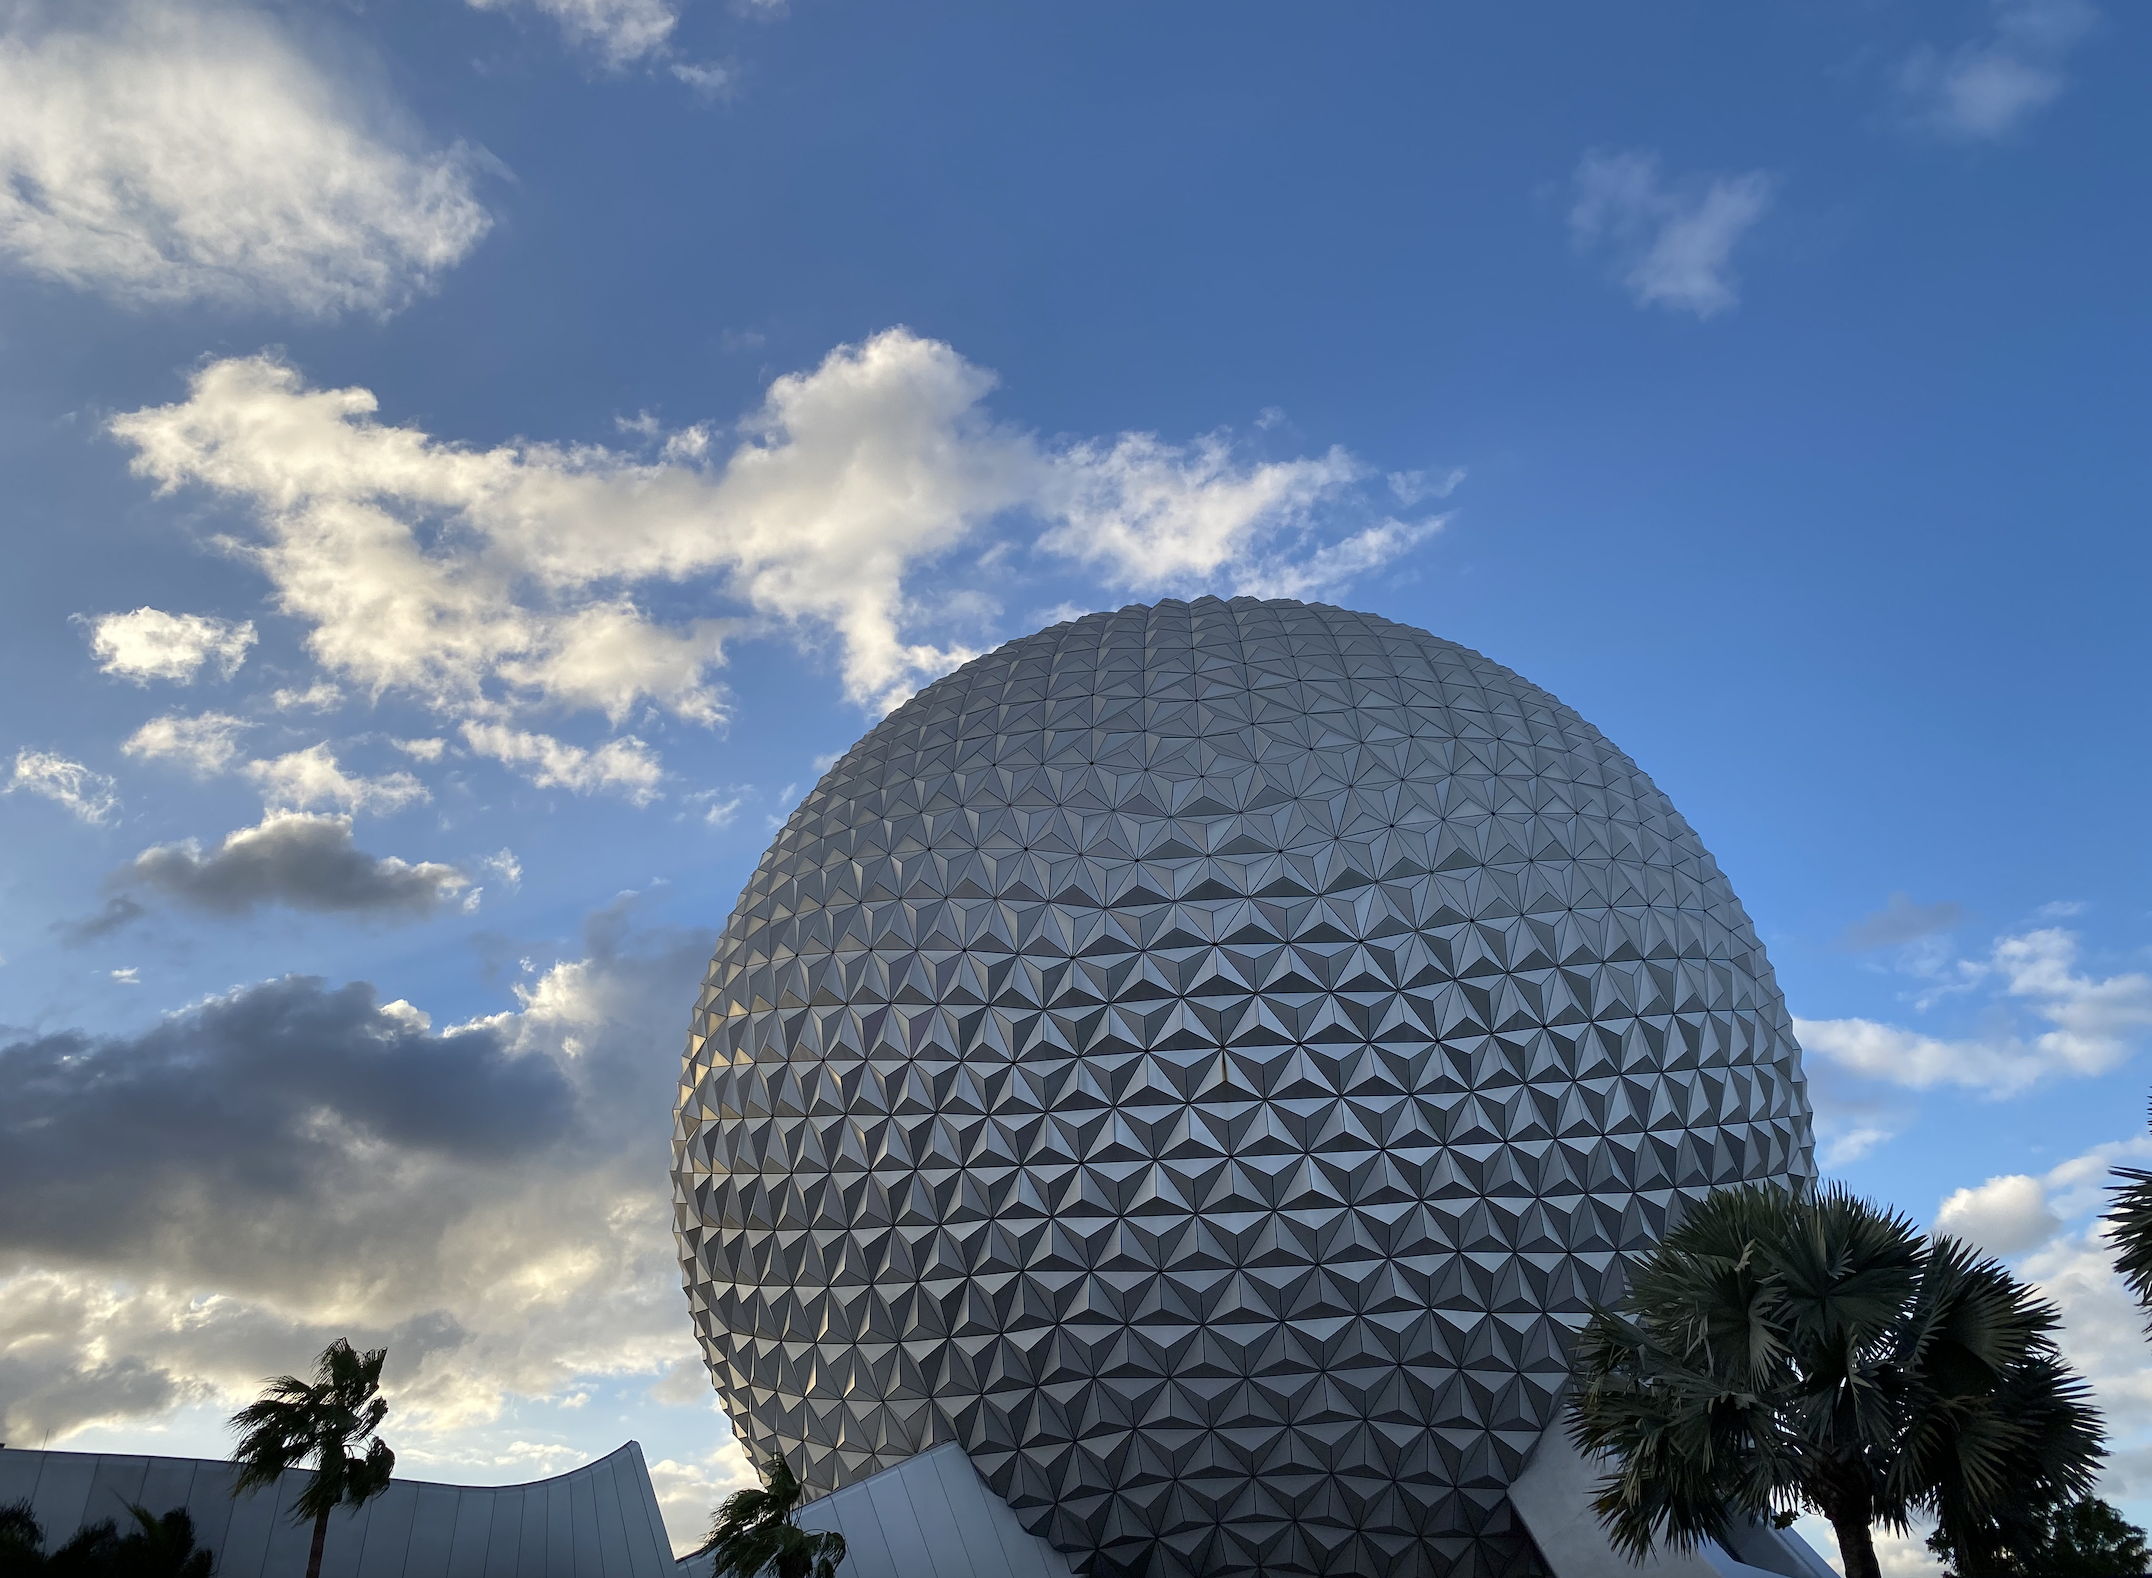 When Does EPCOT Close?